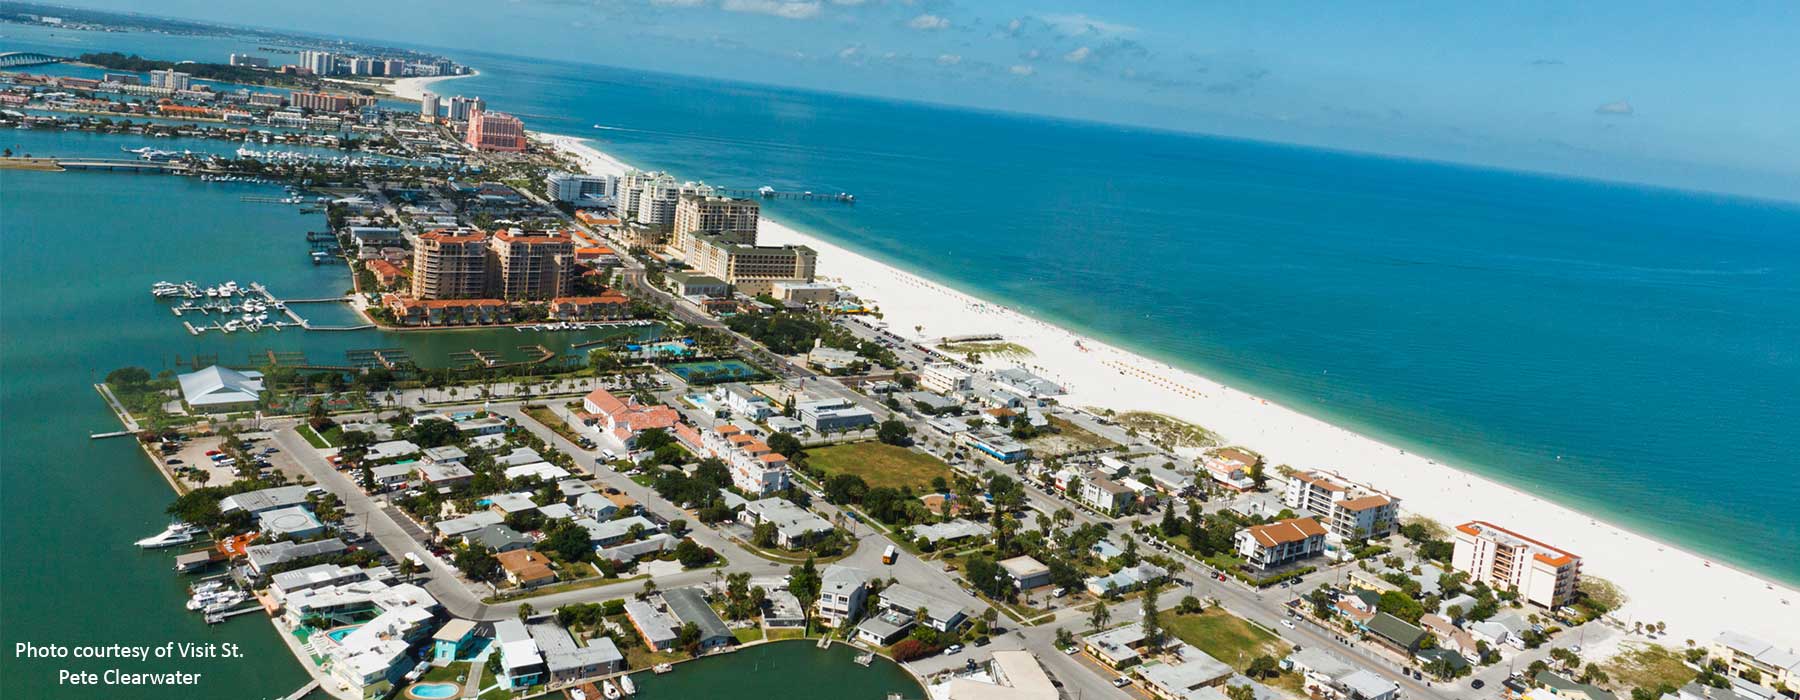 Aerial View of Clearwater Beach